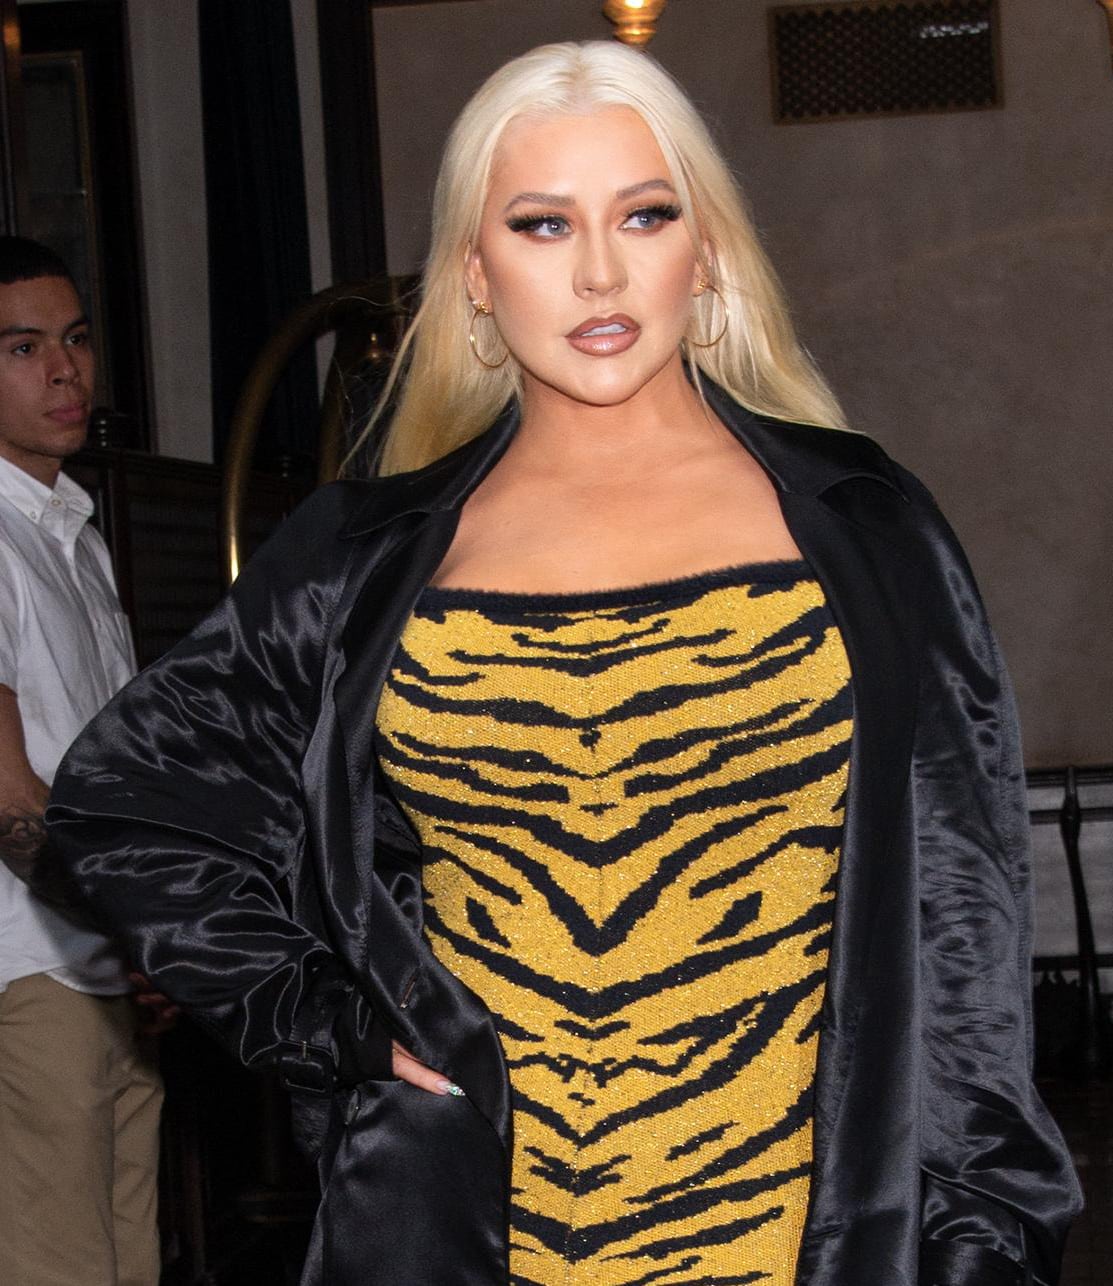 Christina Aguilera wears her mane down and opts for bold makeup with fake eyelashes, smokey eyes, and two-tone nude lips